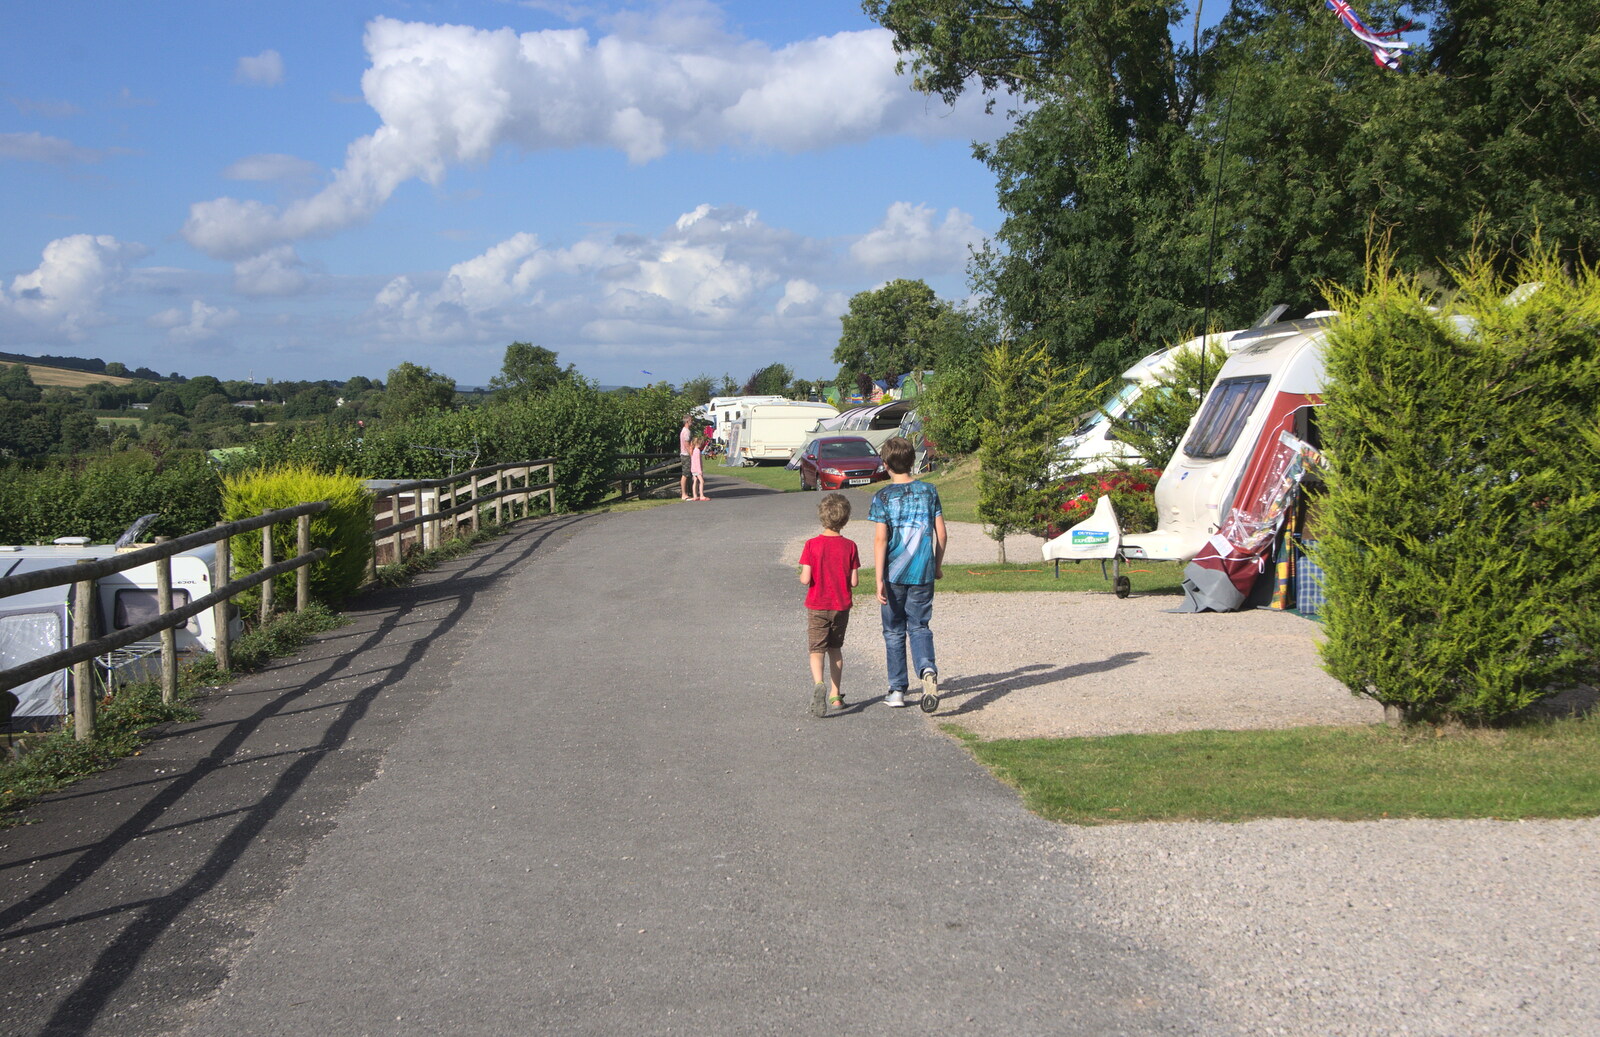 Fred and Rowan wander off from Camping With Sean, Ashburton, Devon - 8th August 2016